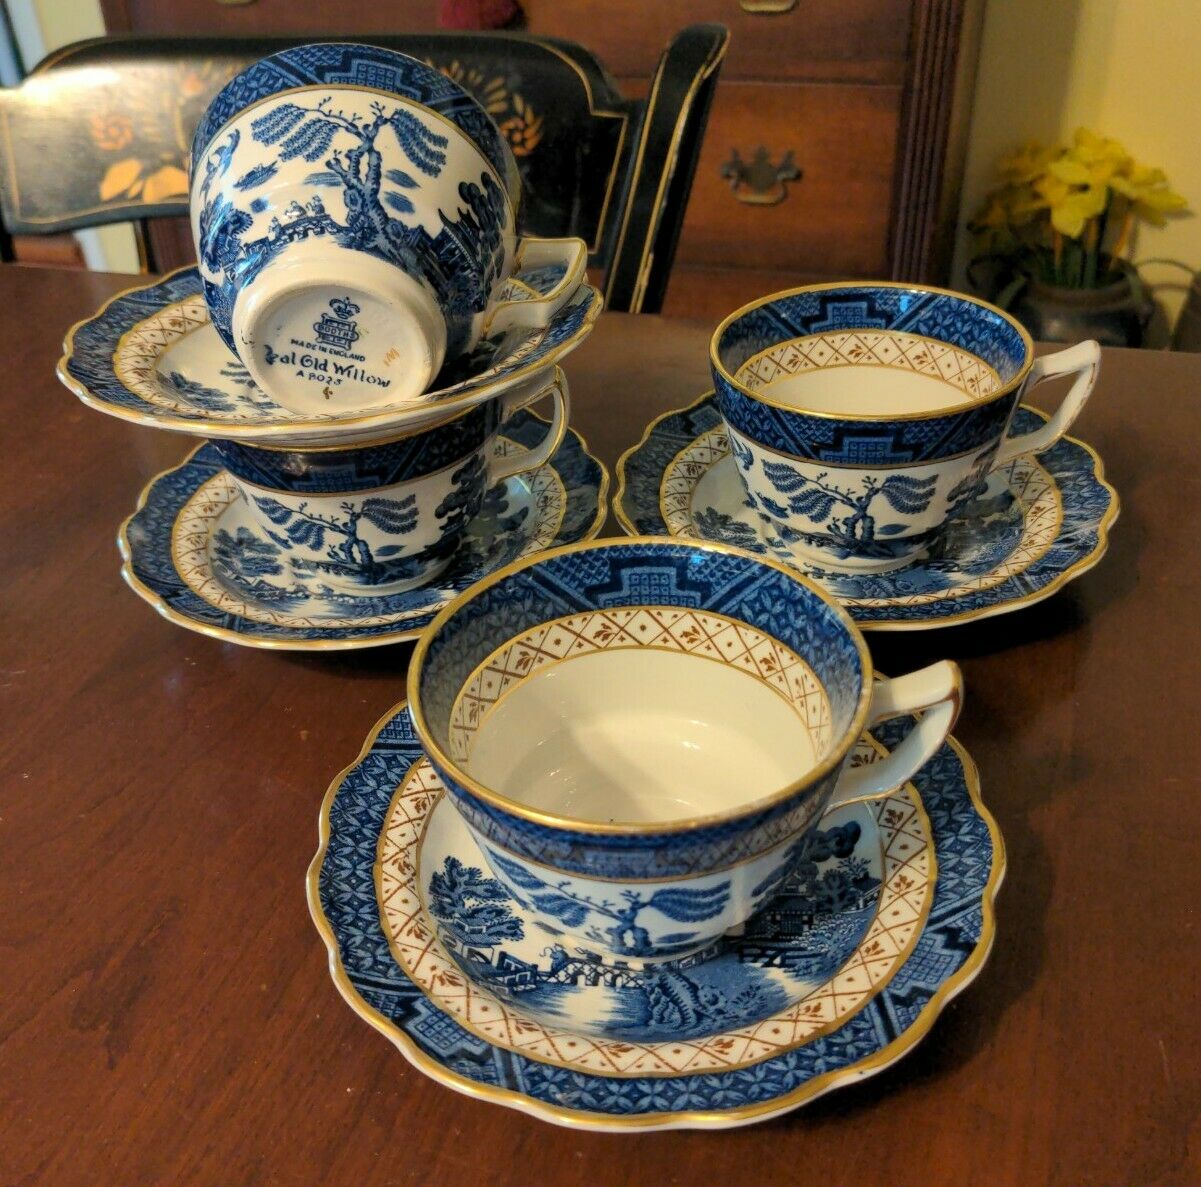 4 Sets Booths Real Old Willow A8025 Cups & Saucers Blue Transferware Gold Gilt B